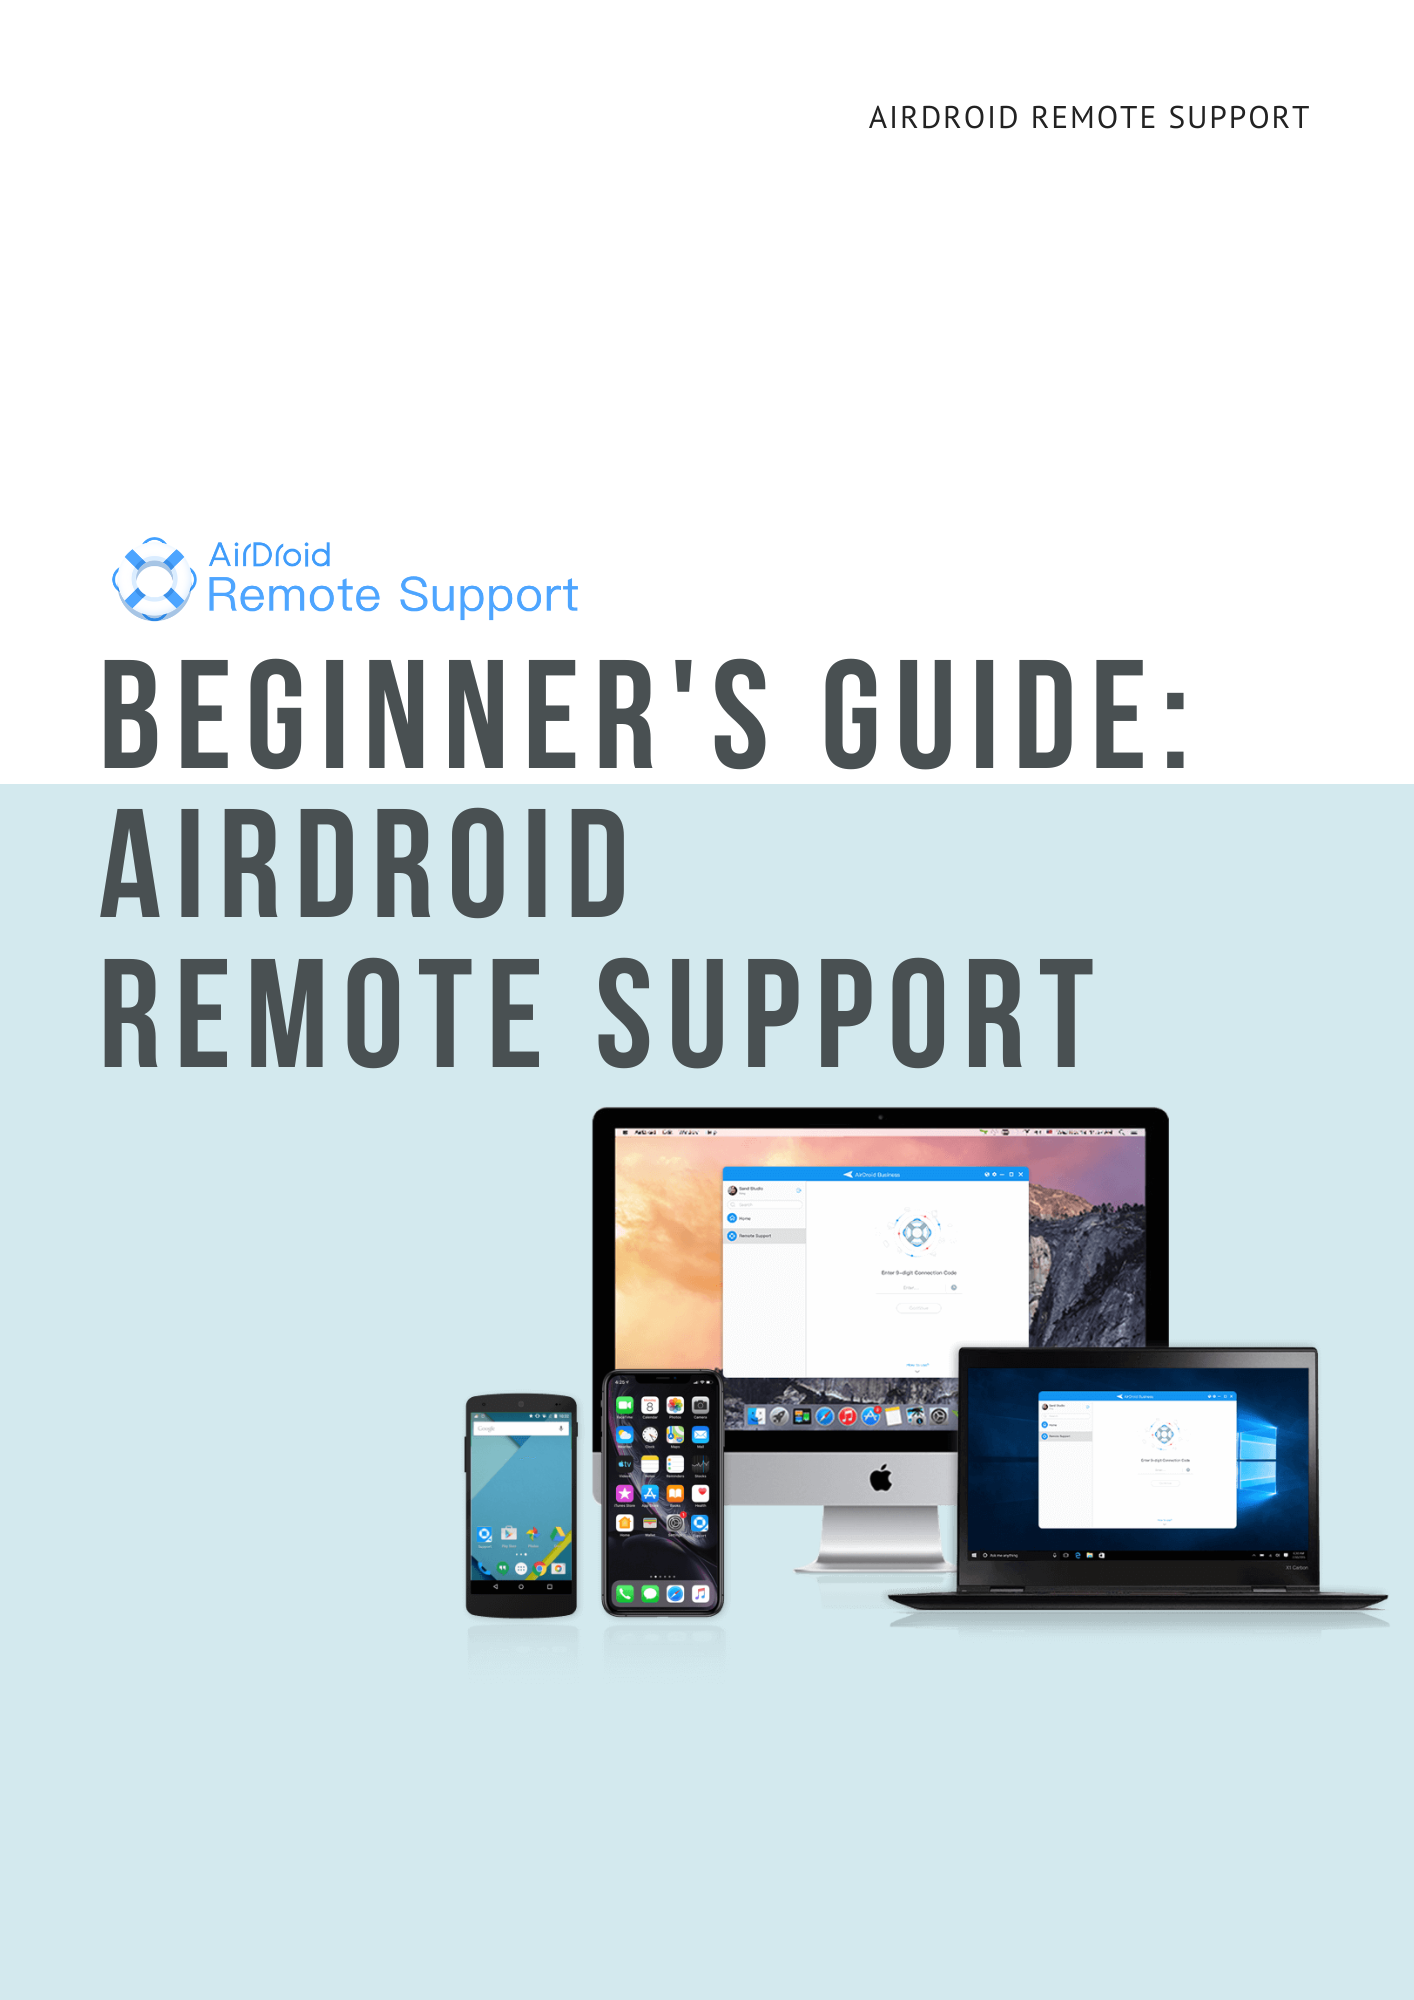 EN-AirDroid Remote Support Guide